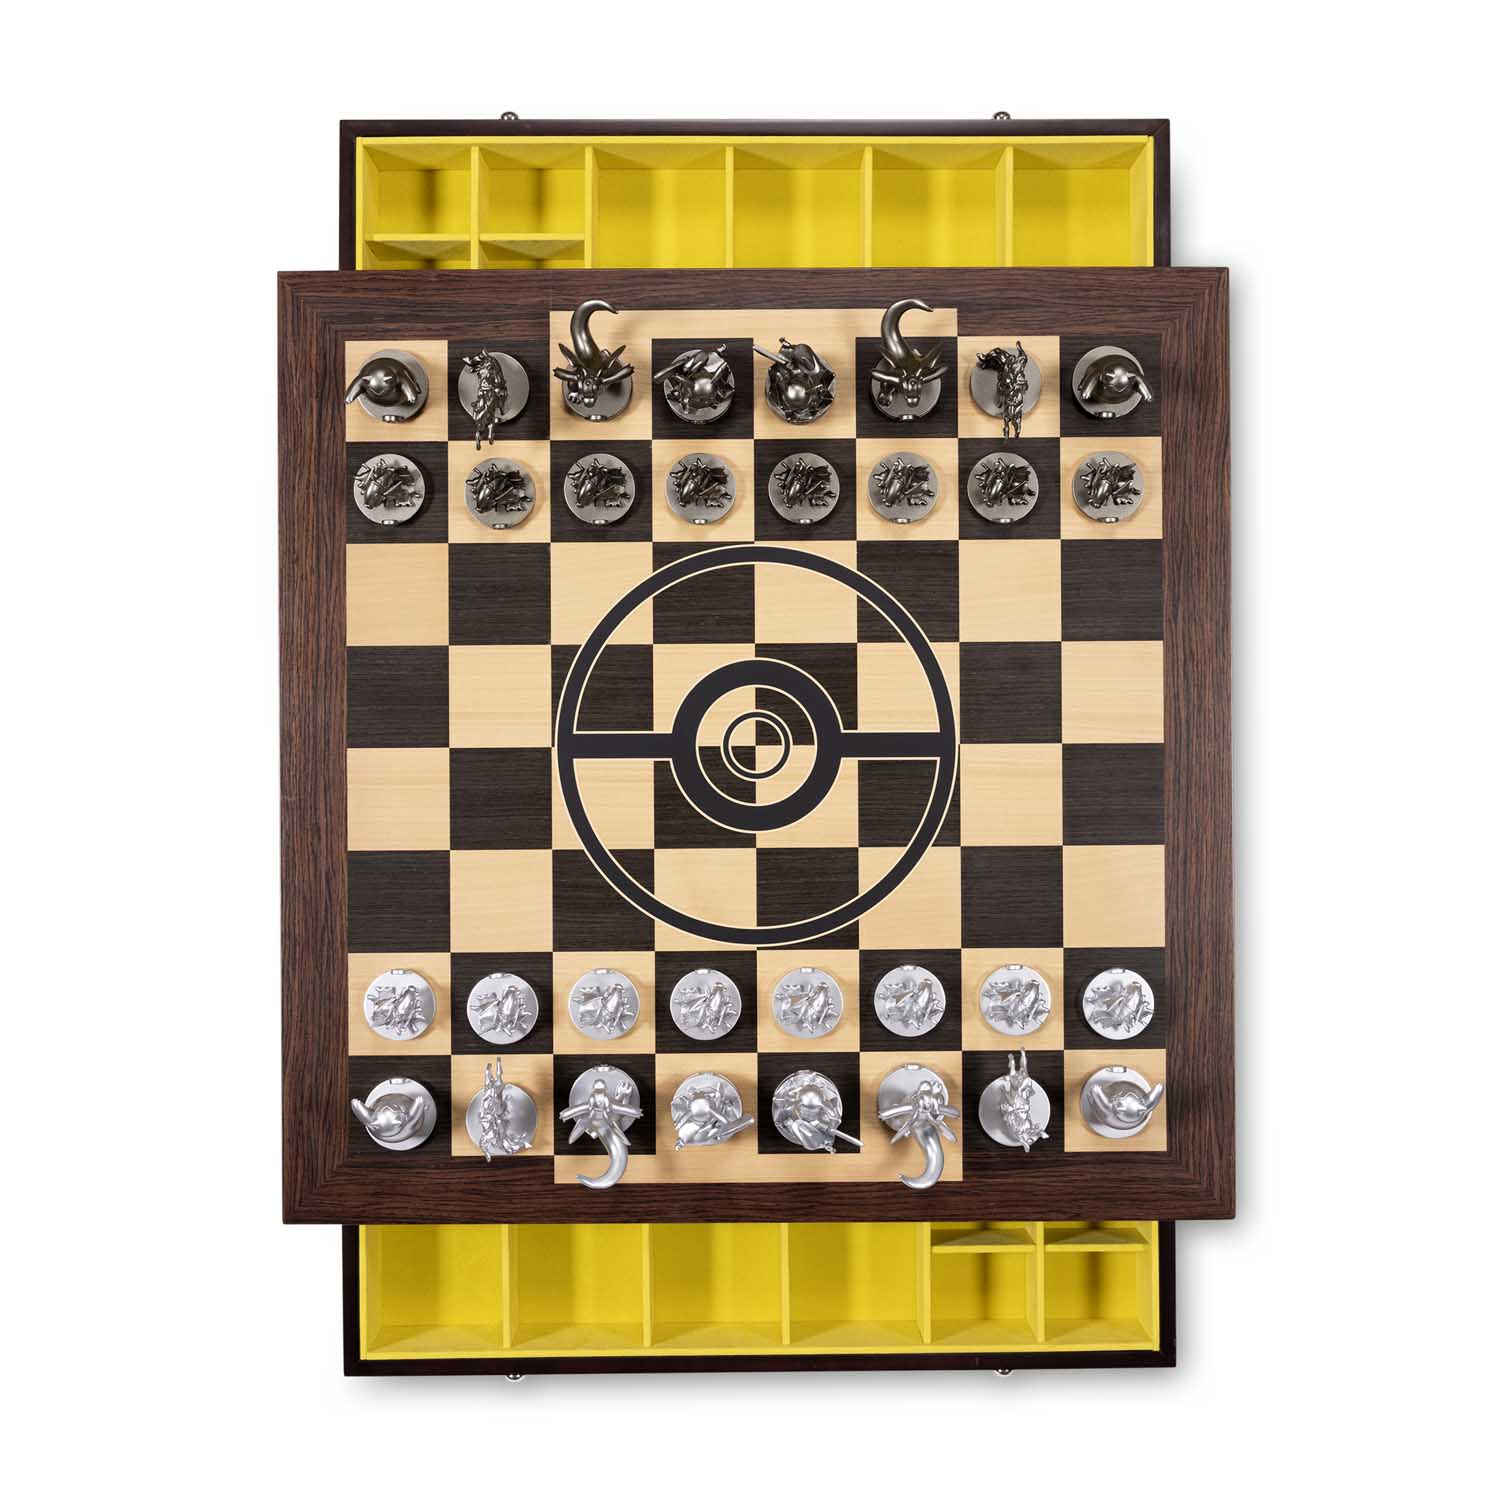 official pokemon chess board